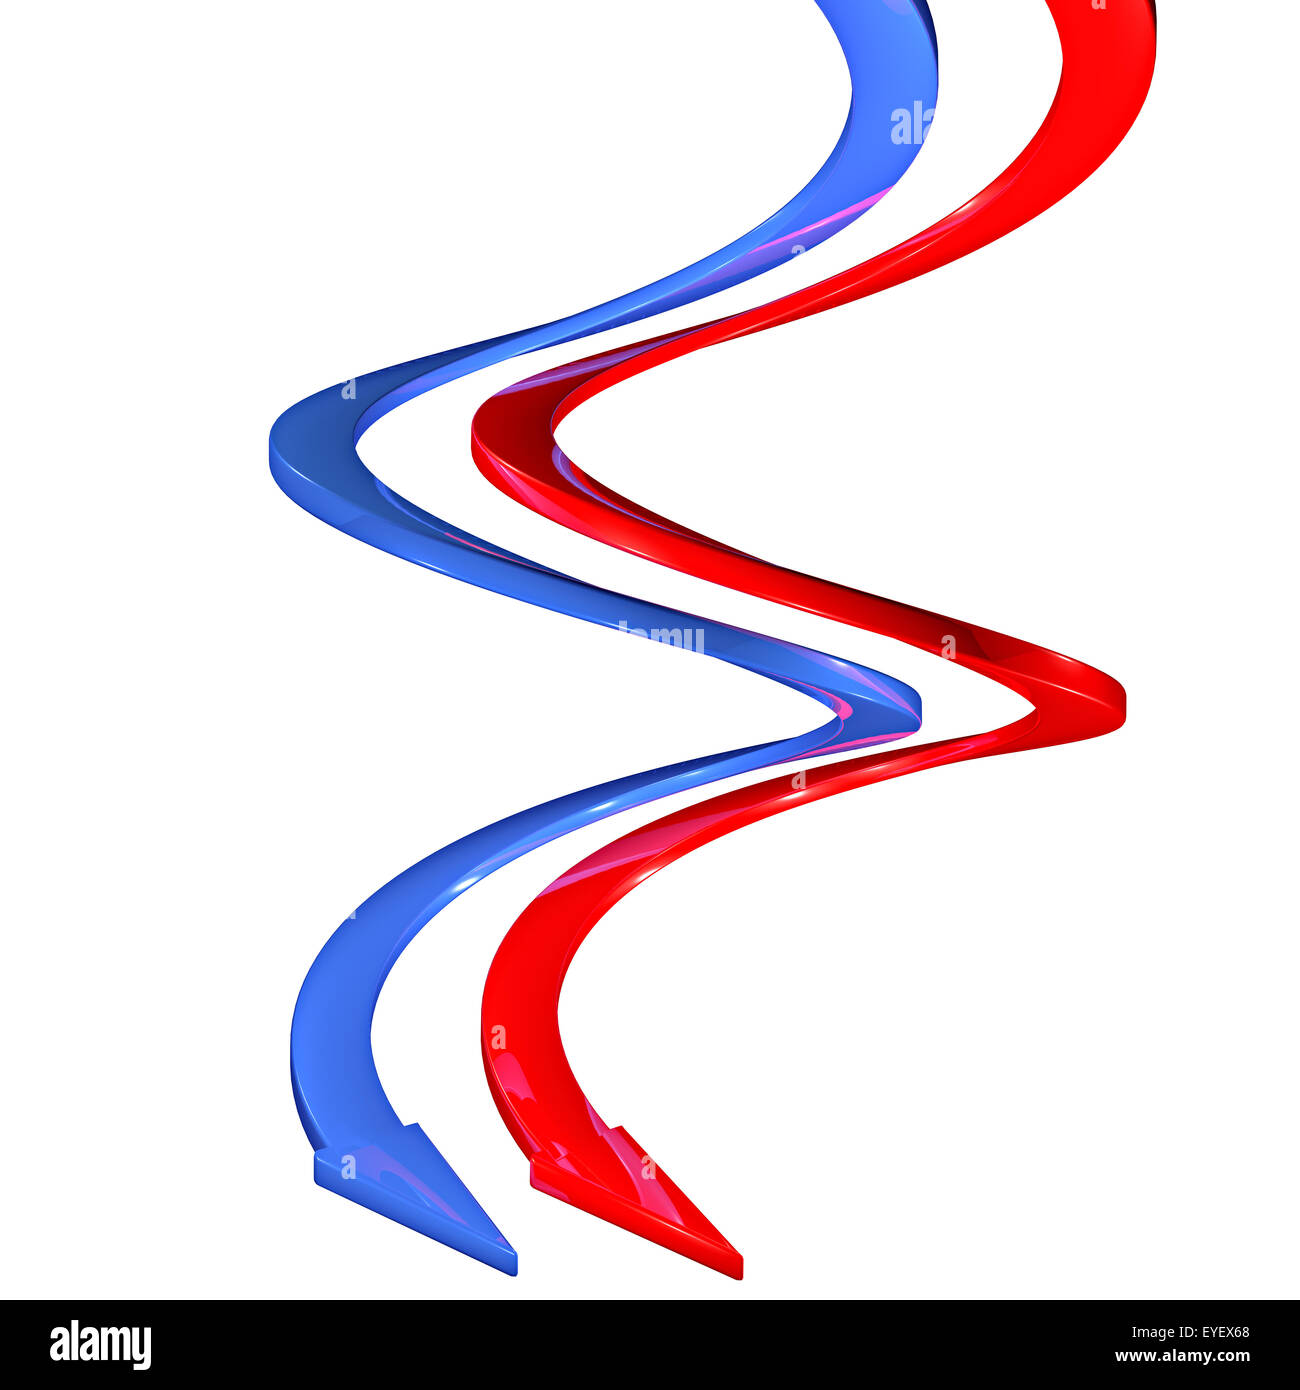 Blue arrows and red 3d spiral curves Stock Photo